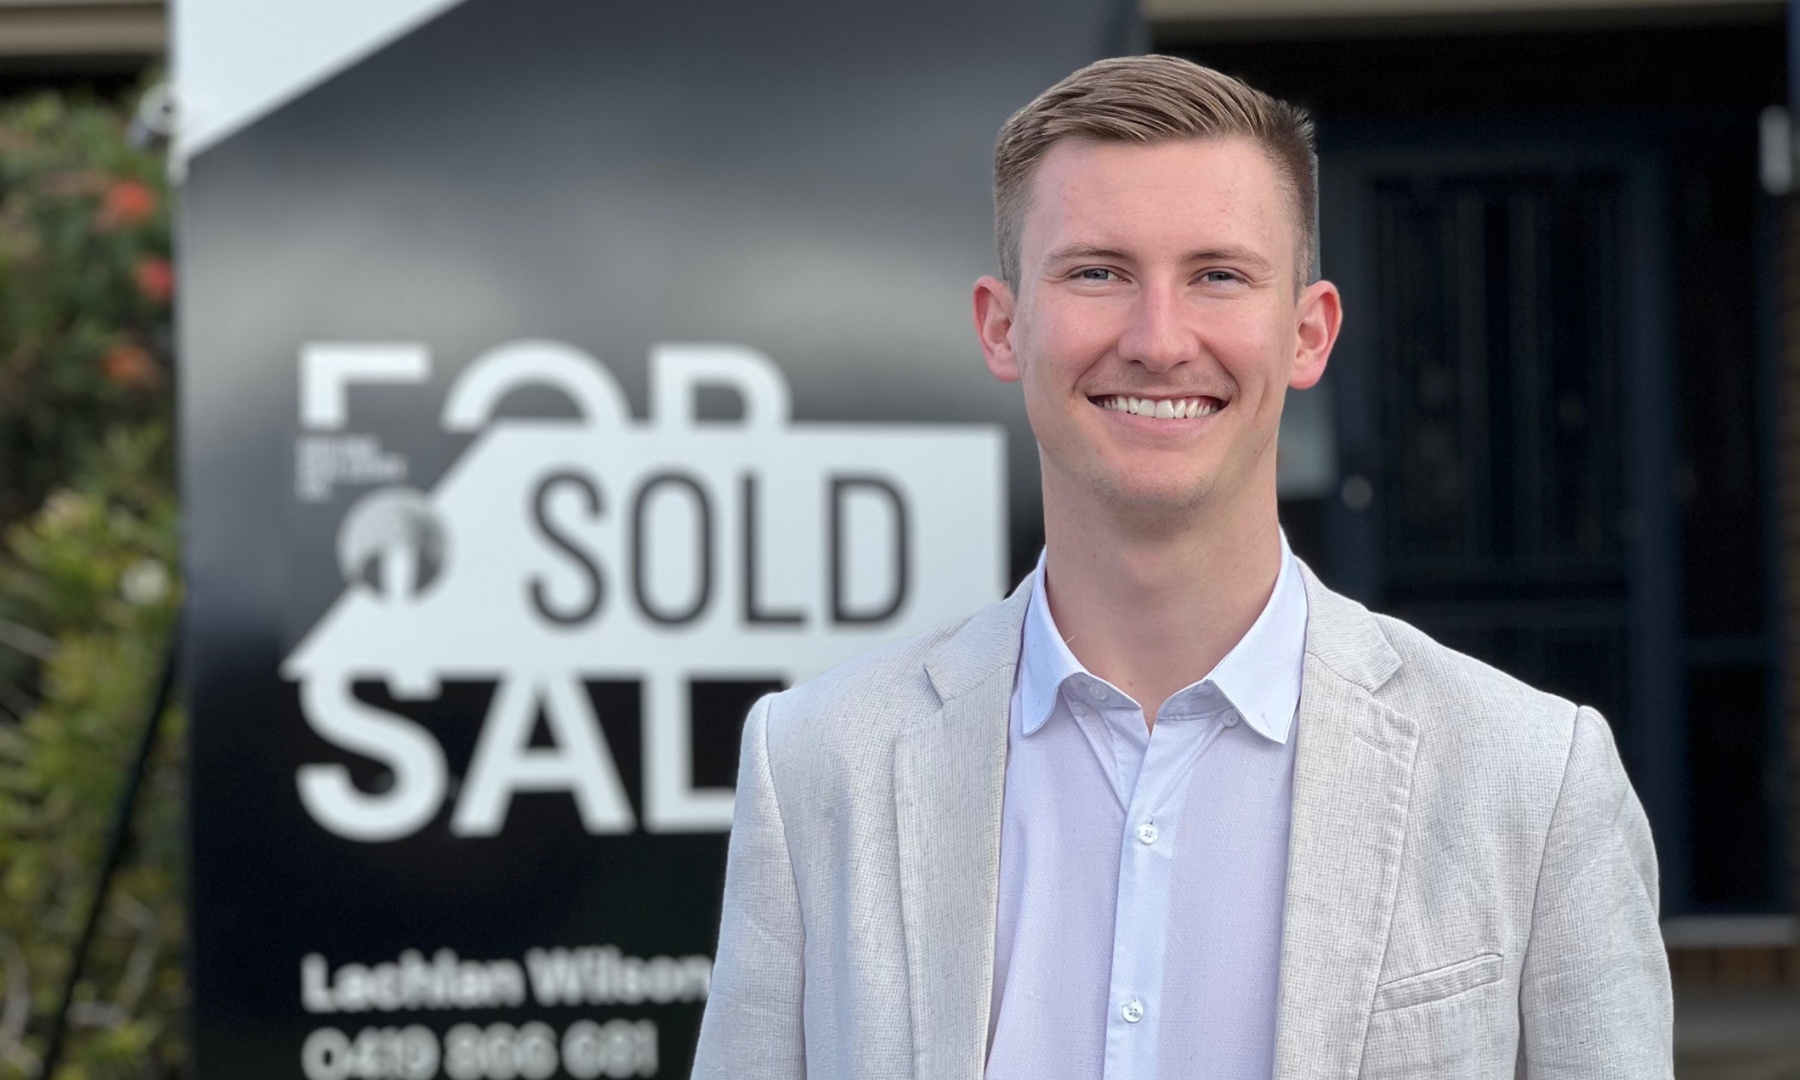 Geelong Real Estate Agent Lachlan Wilson